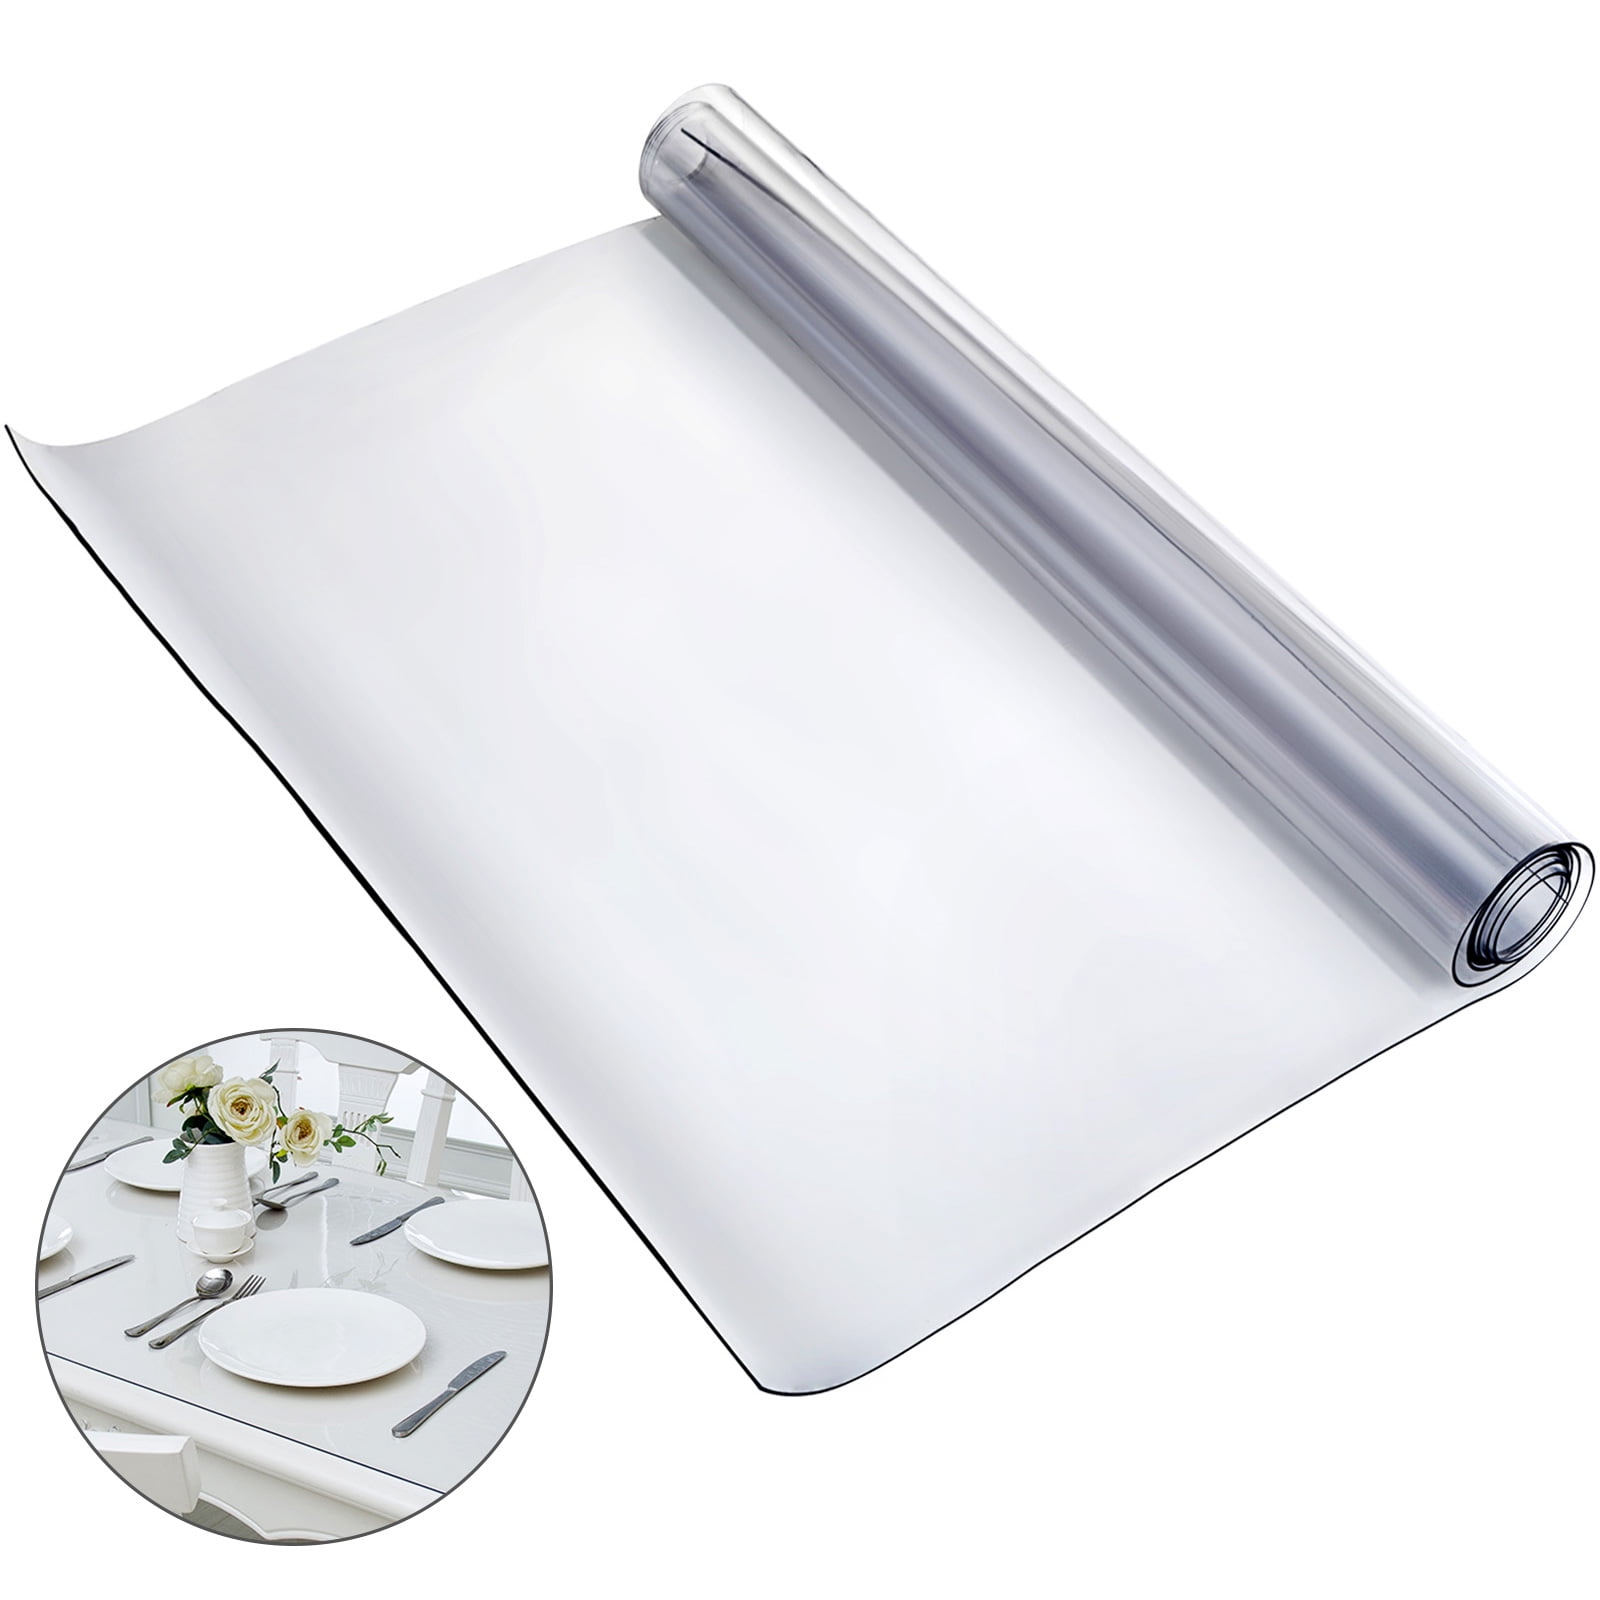 D-groee Clear Dining Room Table Protector Tablecloth Desk Pad Mat Wooden Furniture Coffee Glass End Bed Sofa Side Bar Bistro Dinner Table Cloth Top